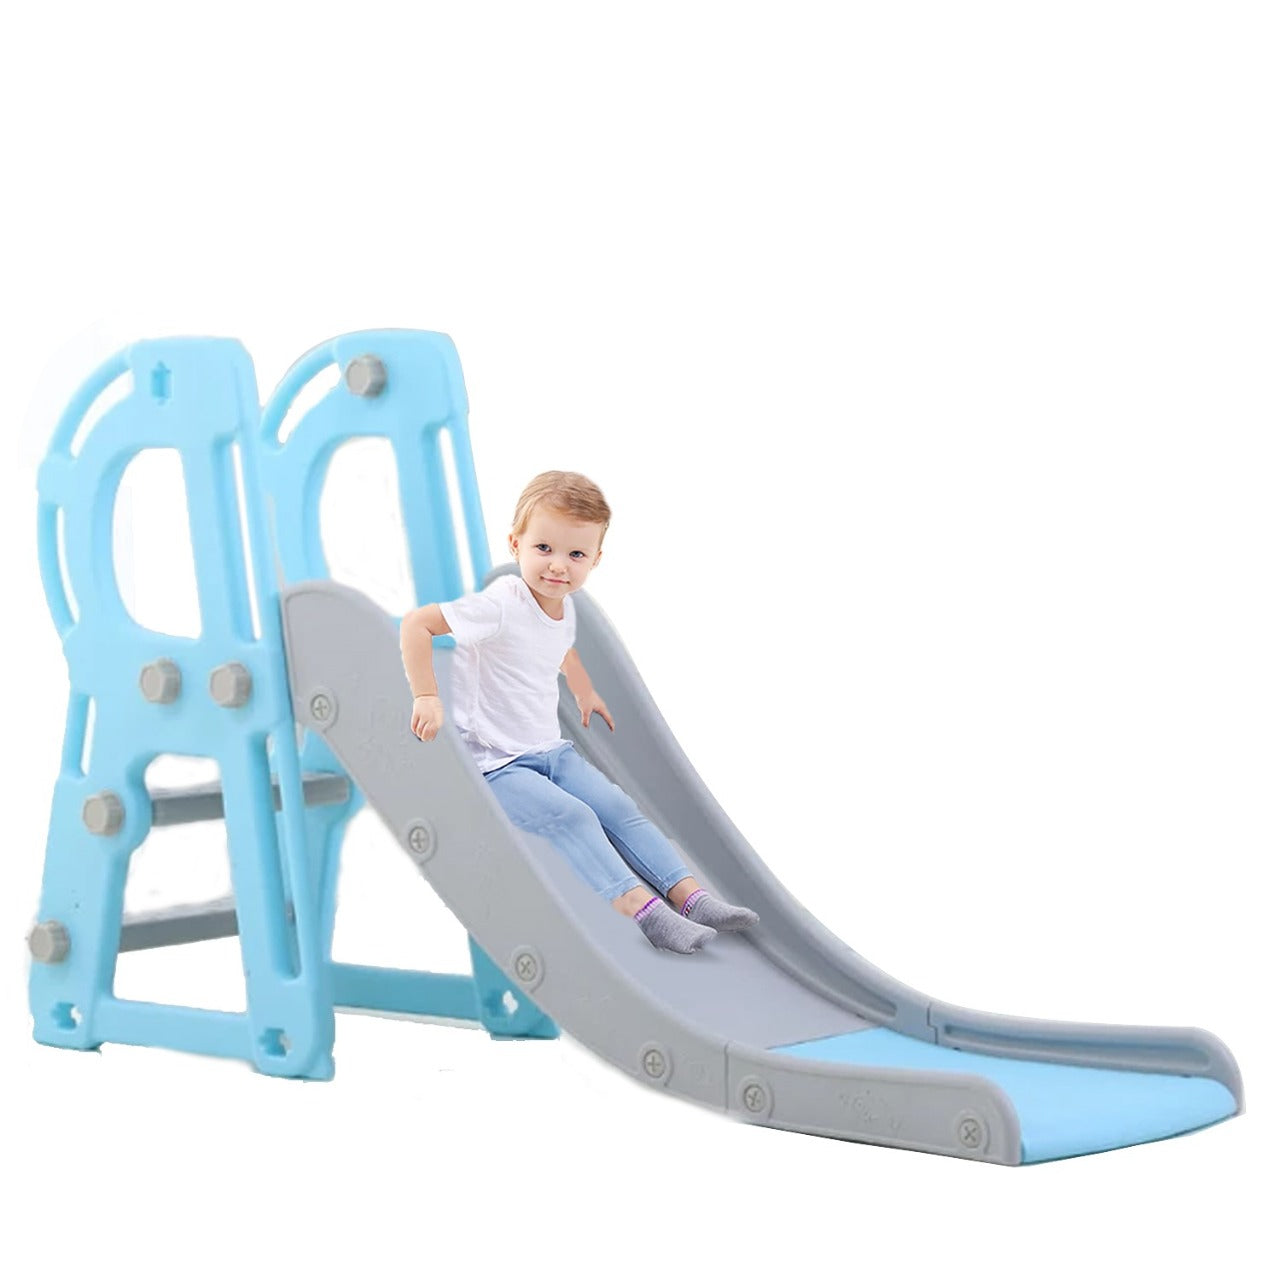 Kid play on Climb and slide Long slide- Pink & Blue